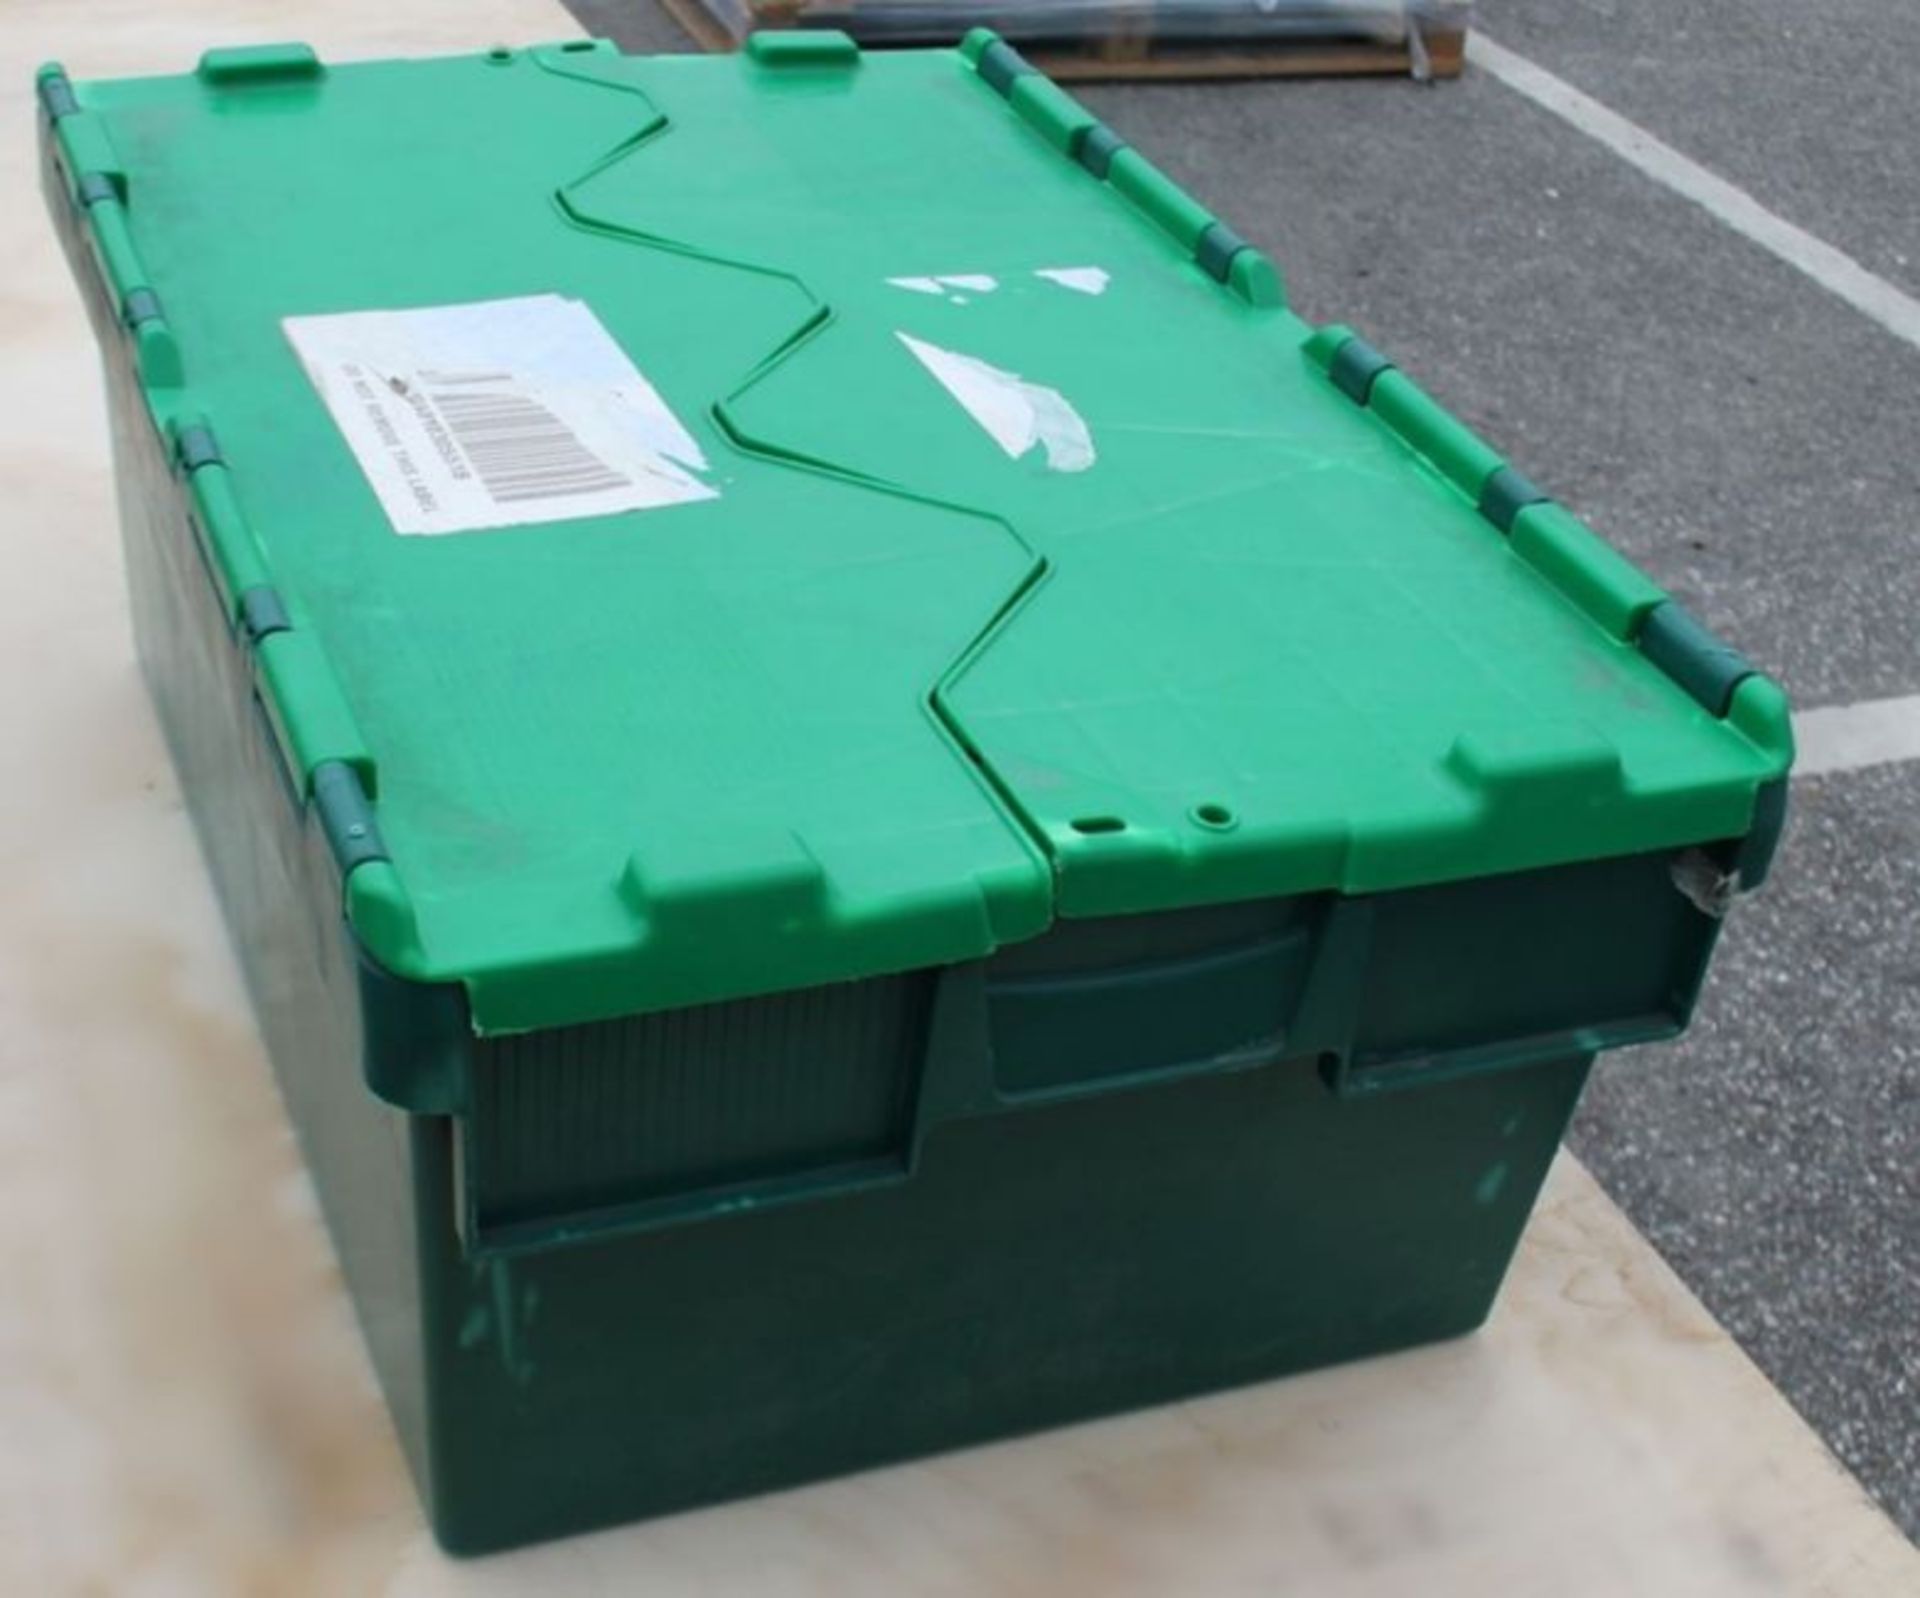 20 x Robust Low Profile Green Plastic Secure Storage Boxes With Attached Hinged Lids - Dimensions: - Image 4 of 7